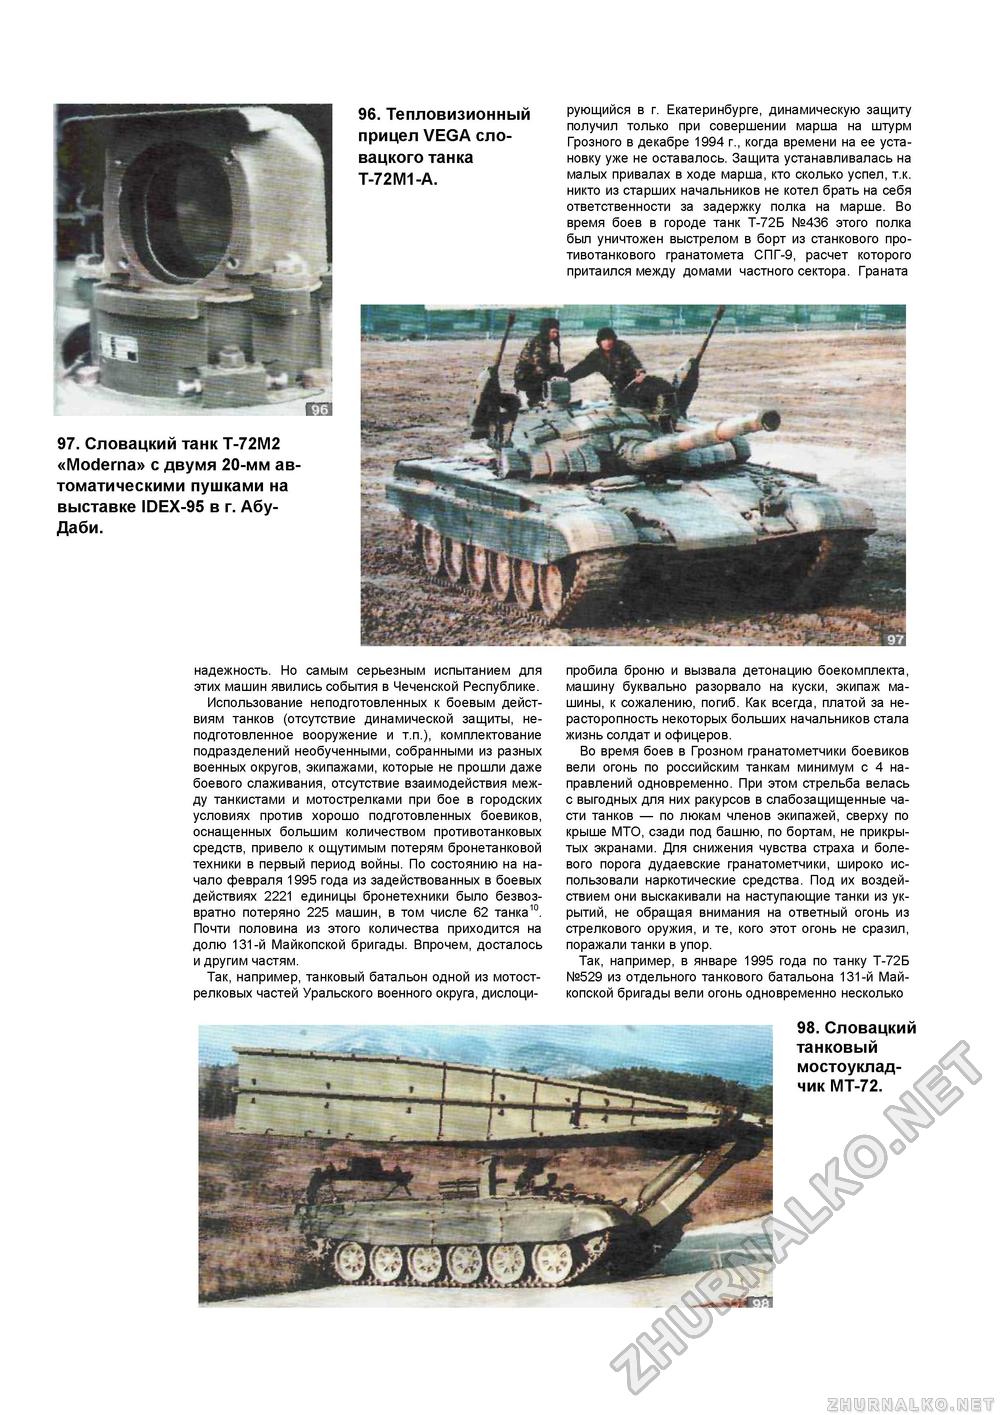  Special -  T-72,  56